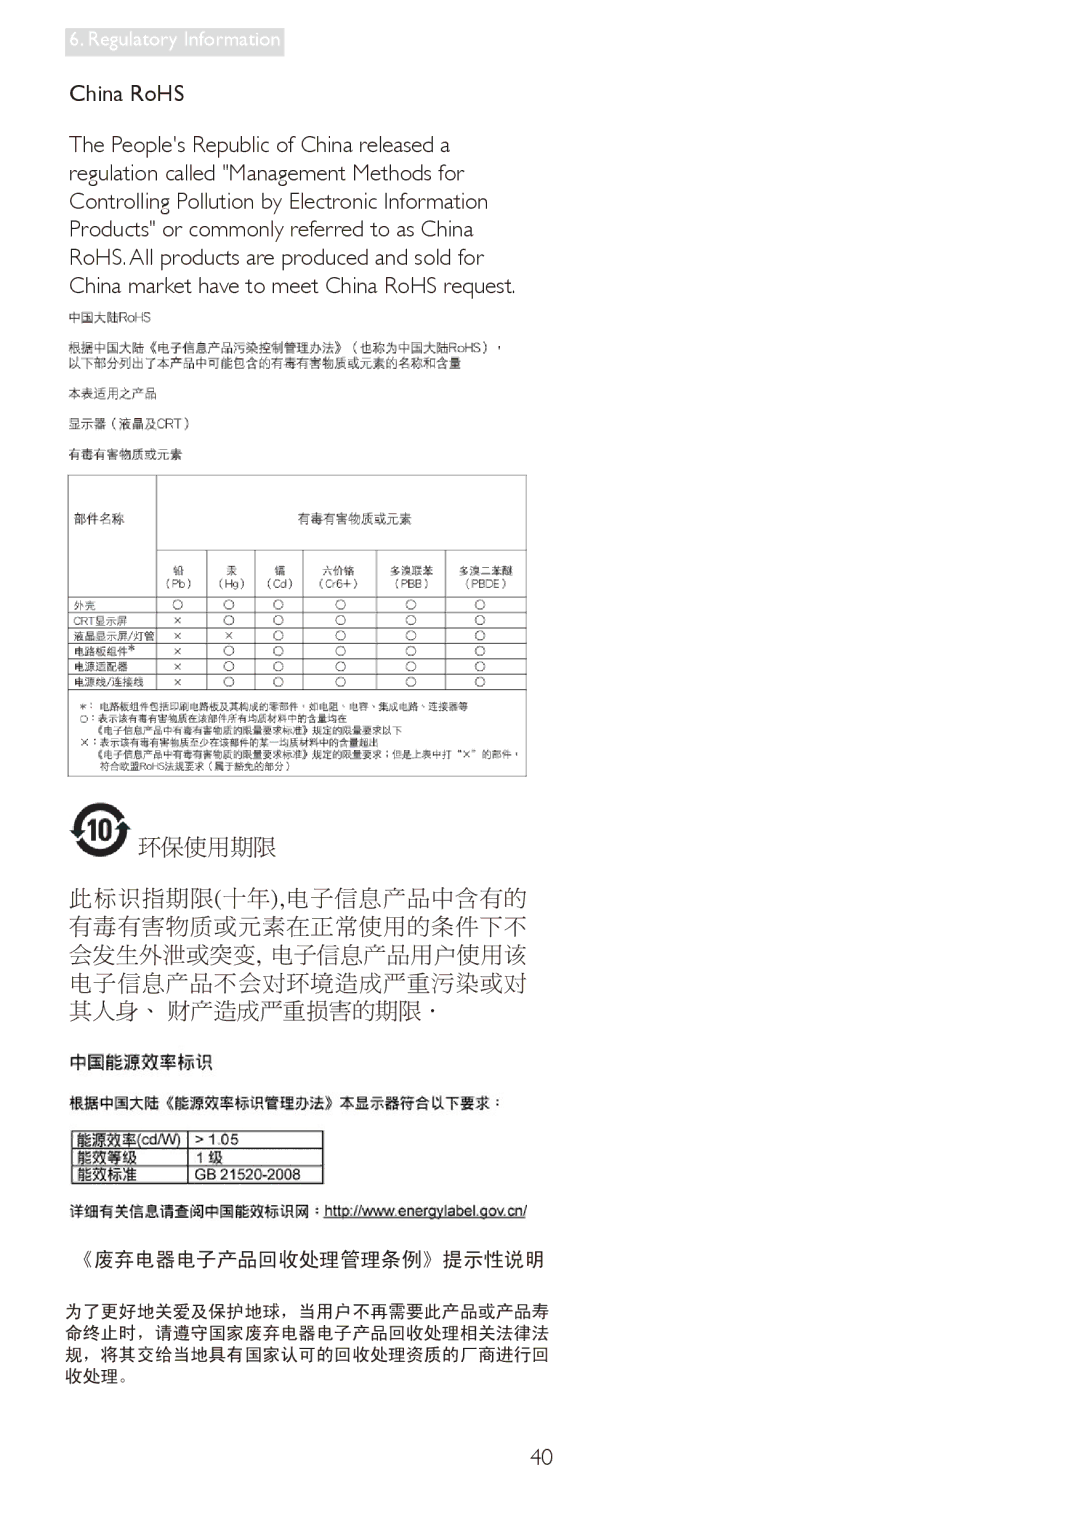 Philips 19S4LC, 19S4LA, 19S4LSB, 19S4LM user manual China RoHS 